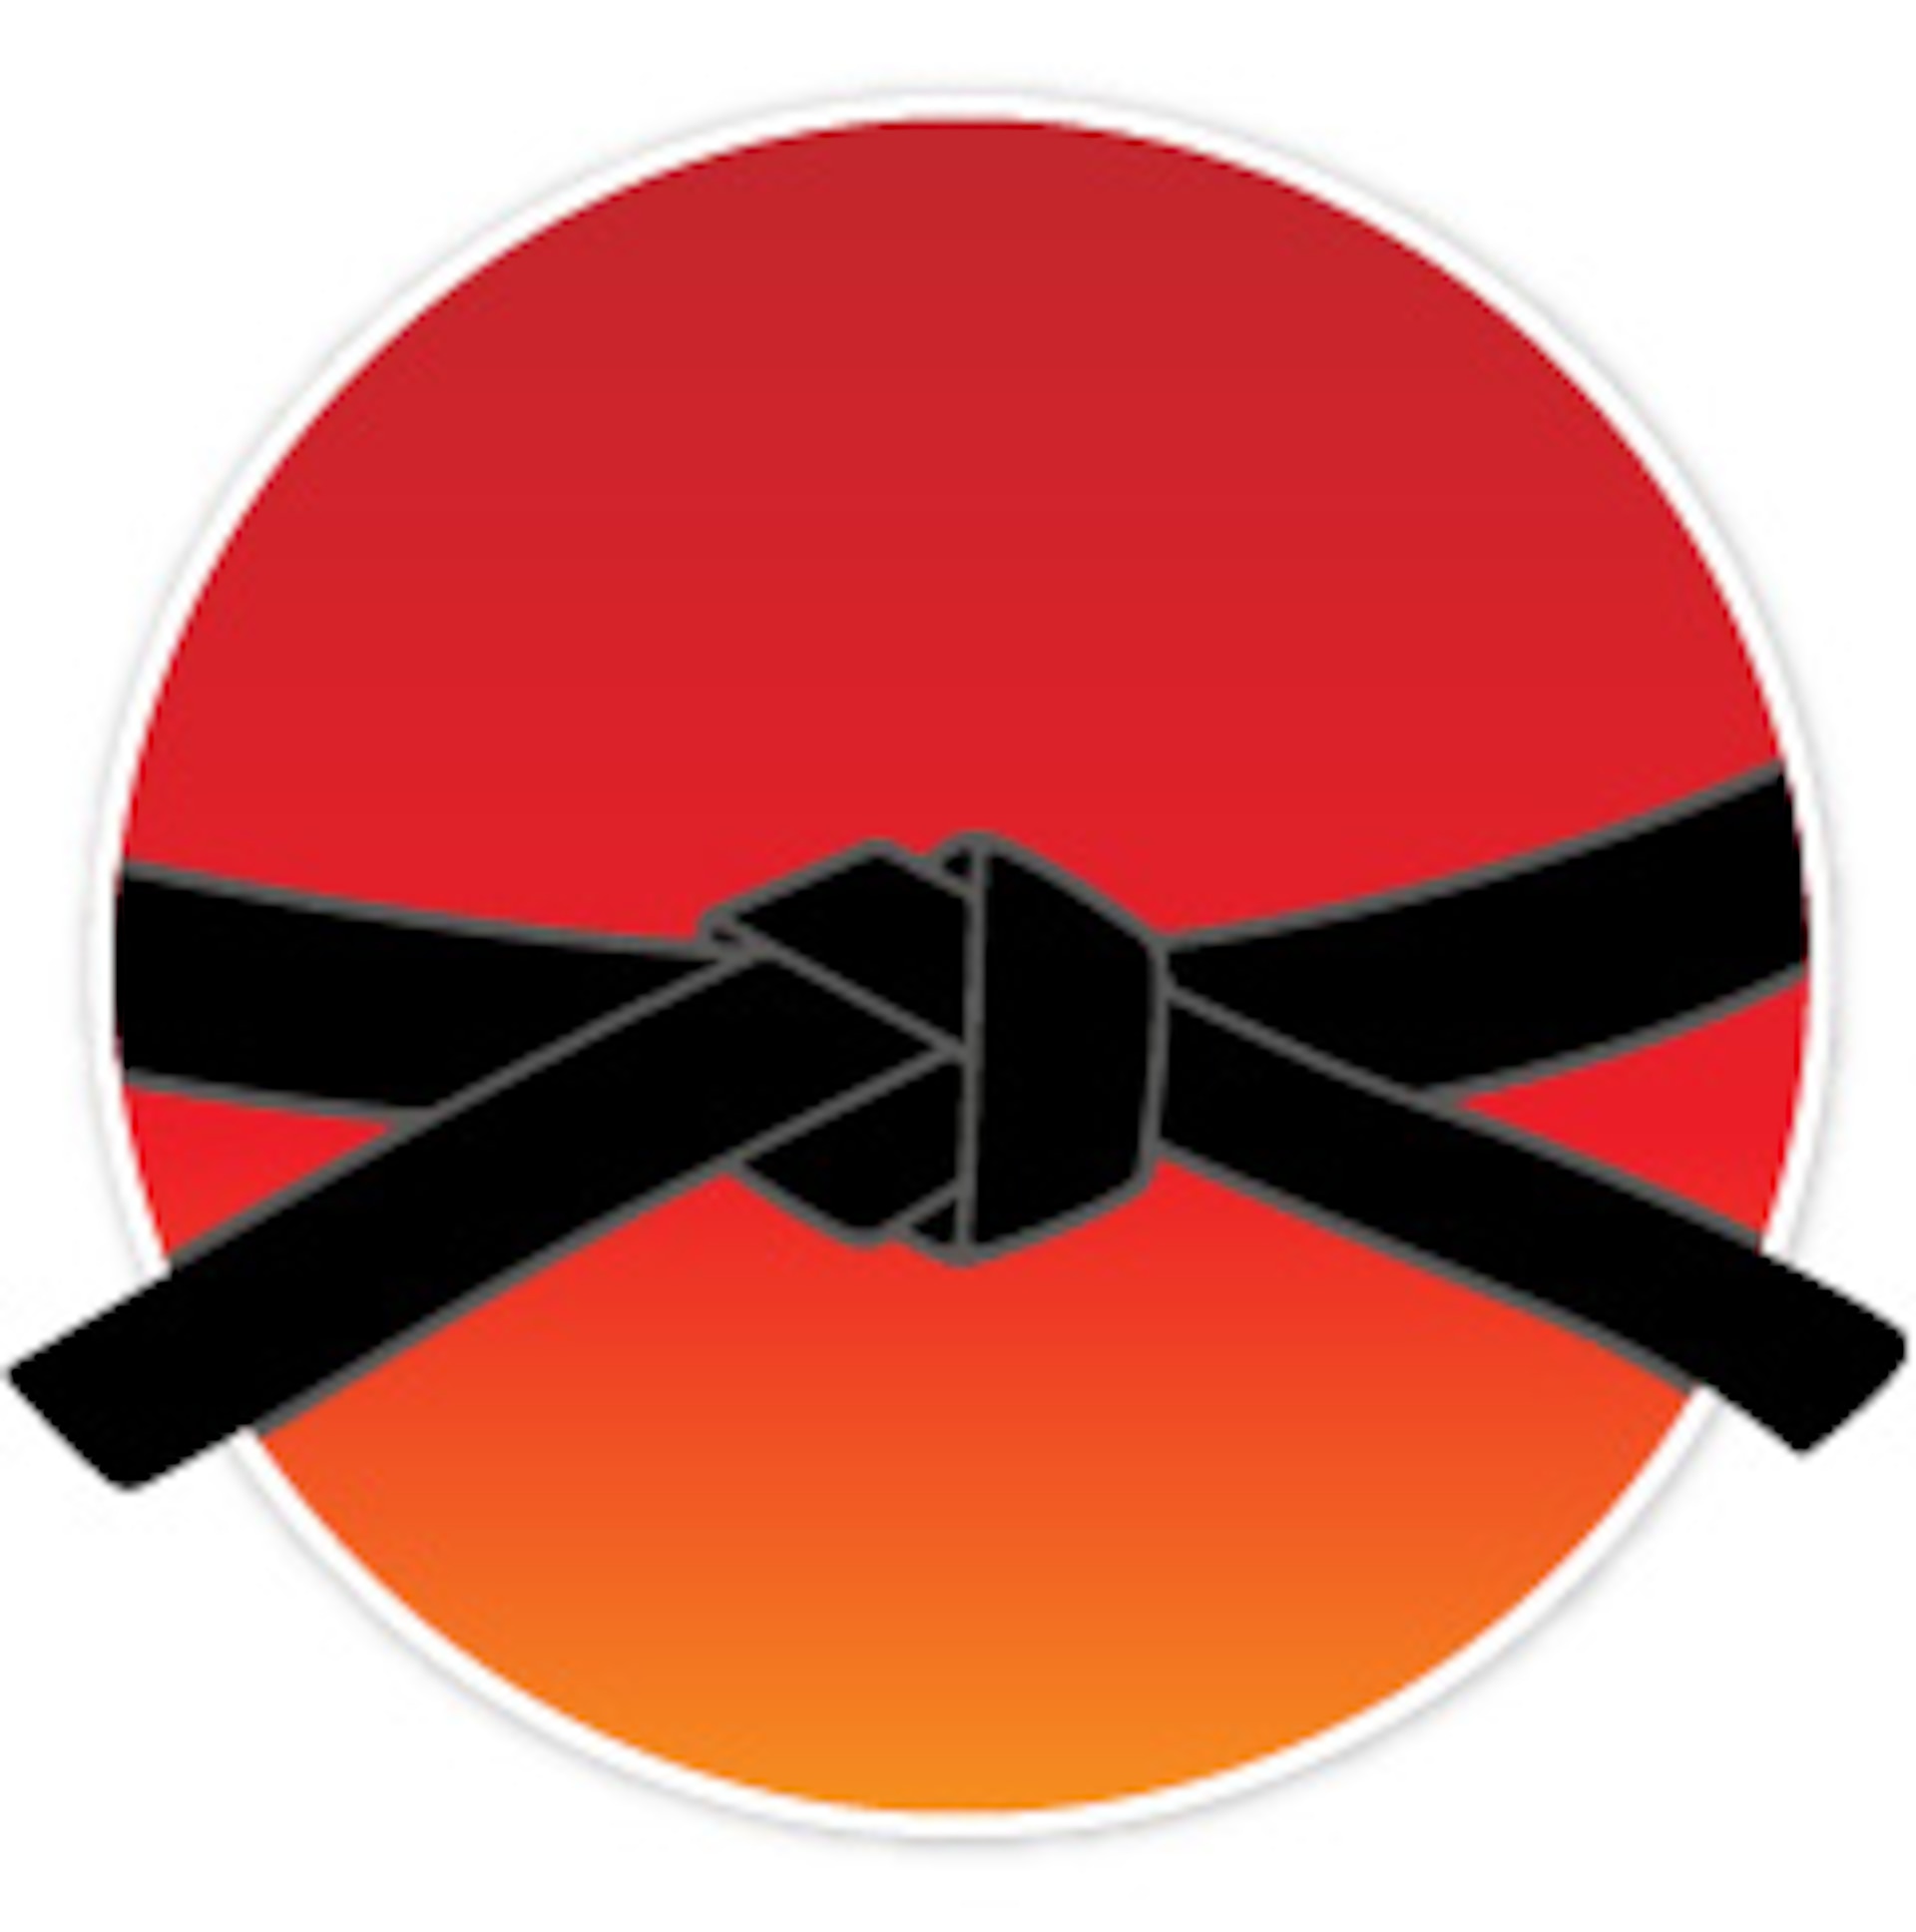 Black belt tied over a red circle